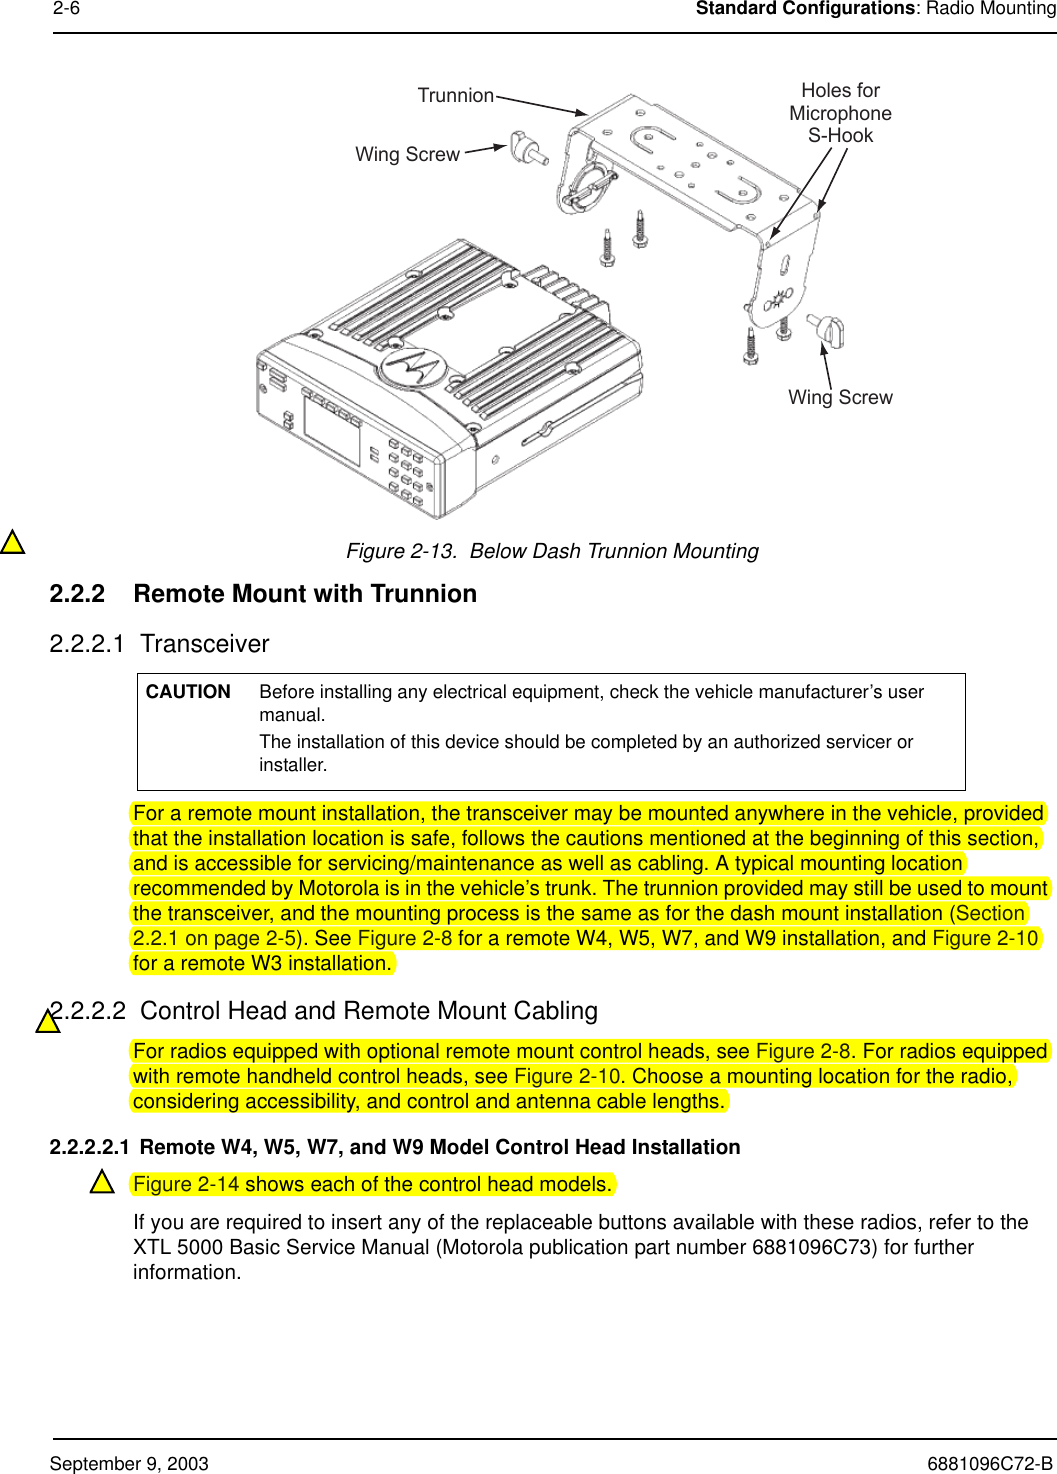 September 9, 2003 6881096C72-B2-6 Standard Configurations: Radio MountingFigure 2-13.  Below Dash Trunnion Mounting2.2.2 Remote Mount with Trunnion2.2.2.1  TransceiverFor a remote mount installation, the transceiver may be mounted anywhere in the vehicle, provided that the installation location is safe, follows the cautions mentioned at the beginning of this section, and is accessible for servicing/maintenance as well as cabling. A typical mounting location recommended by Motorola is in the vehicle’s trunk. The trunnion provided may still be used to mount the transceiver, and the mounting process is the same as for the dash mount installation (Section 2.2.1 on page 2-5). See Figure 2-8 for a remote W4, W5, W7, and W9 installation, and Figure 2-10 for a remote W3 installation.2.2.2.2  Control Head and Remote Mount CablingFor radios equipped with optional remote mount control heads, see Figure 2-8. For radios equipped with remote handheld control heads, see Figure 2-10. Choose a mounting location for the radio, considering accessibility, and control and antenna cable lengths. 2.2.2.2.1 Remote W4, W5, W7, and W9 Model Control Head InstallationFigure 2-14 shows each of the control head models.If you are required to insert any of the replaceable buttons available with these radios, refer to the XTL 5000 Basic Service Manual (Motorola publication part number 6881096C73) for further information.CAUTION Before installing any electrical equipment, check the vehicle manufacturer’s user manual.  The installation of this device should be completed by an authorized servicer or installer.TrunnionWing ScrewWing ScrewHoles forMicrophoneS-Hook